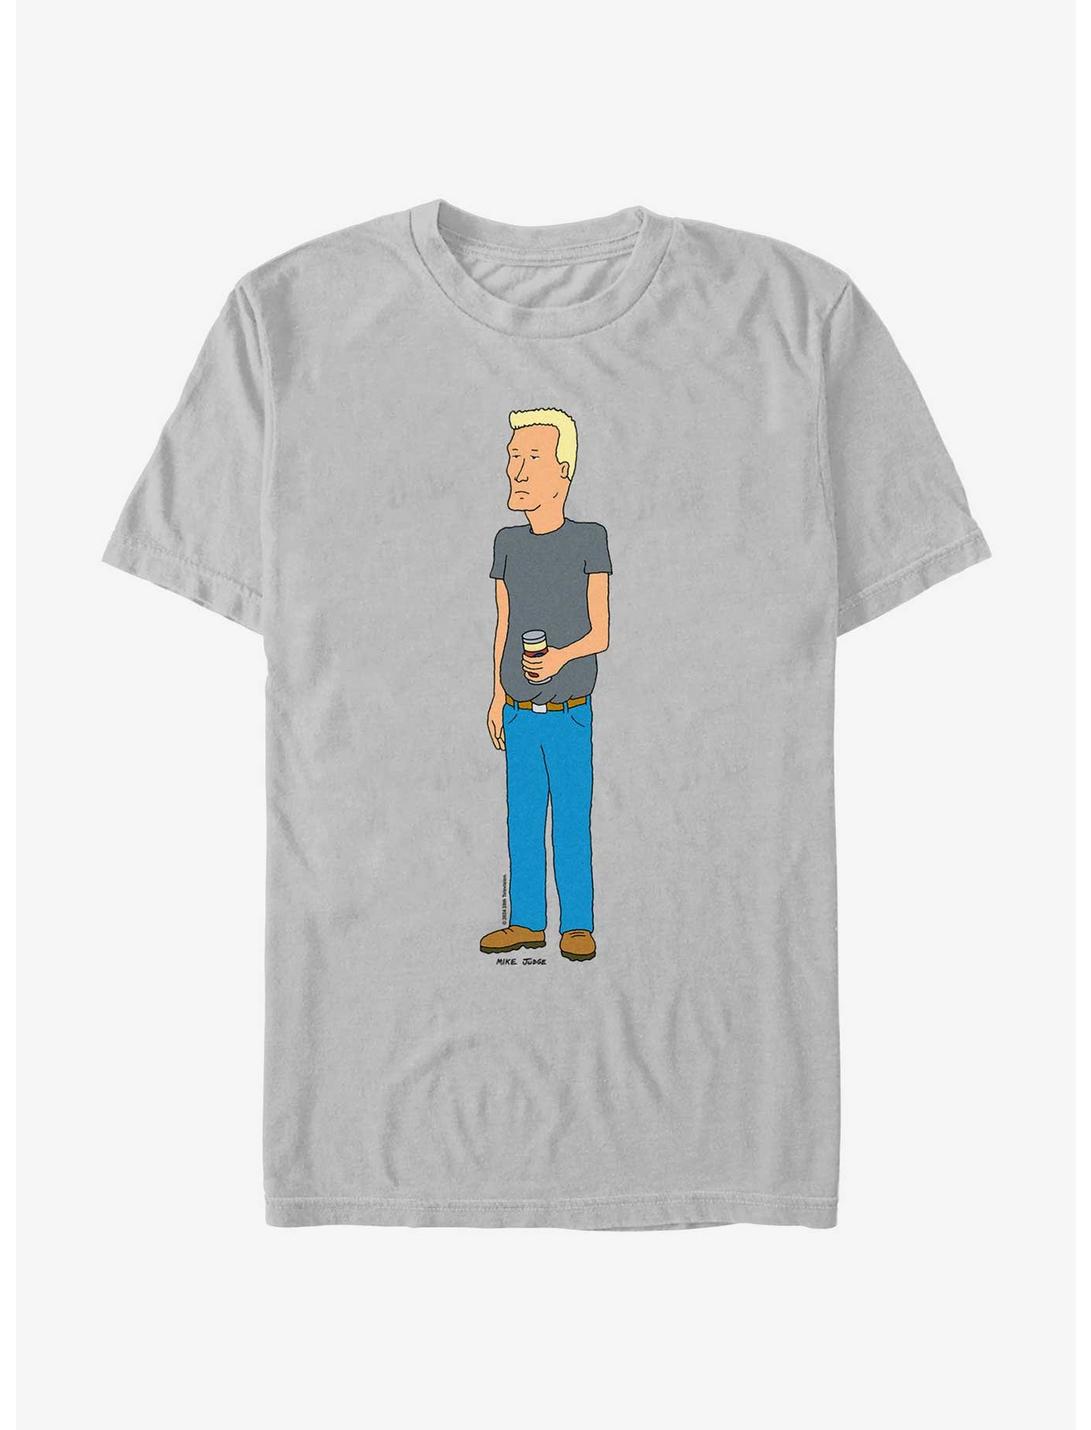 King of the Hill Boomhauer T-Shirt, SILVER, hi-res